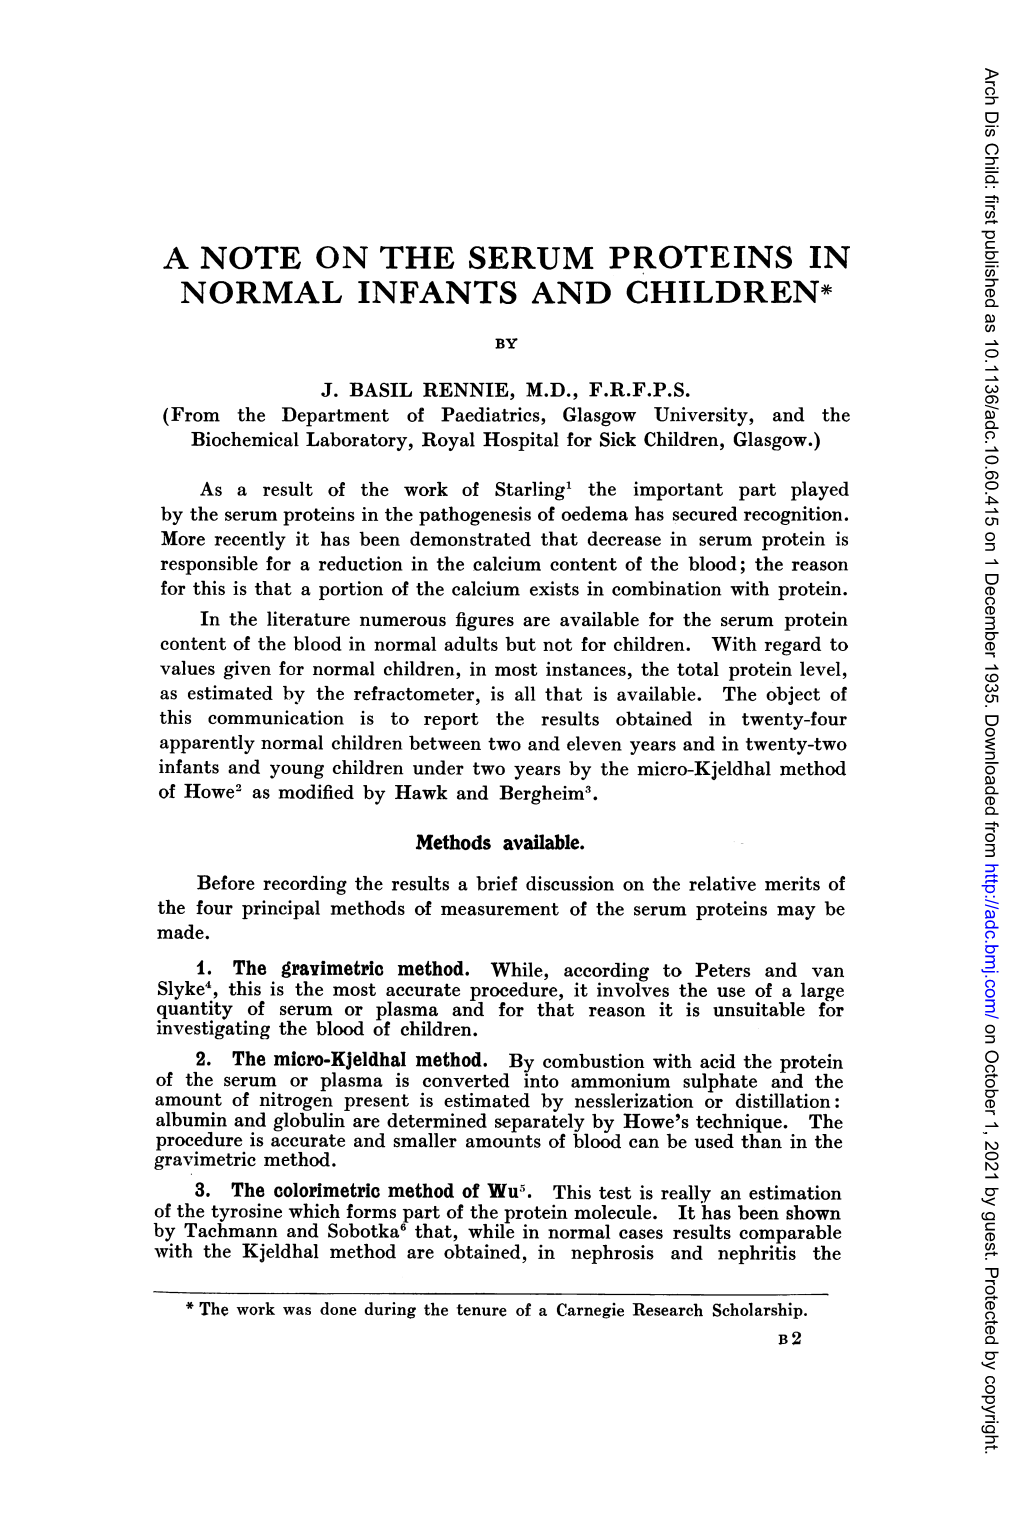 A Note on the Serum Proteins in Normal Infants and Children*